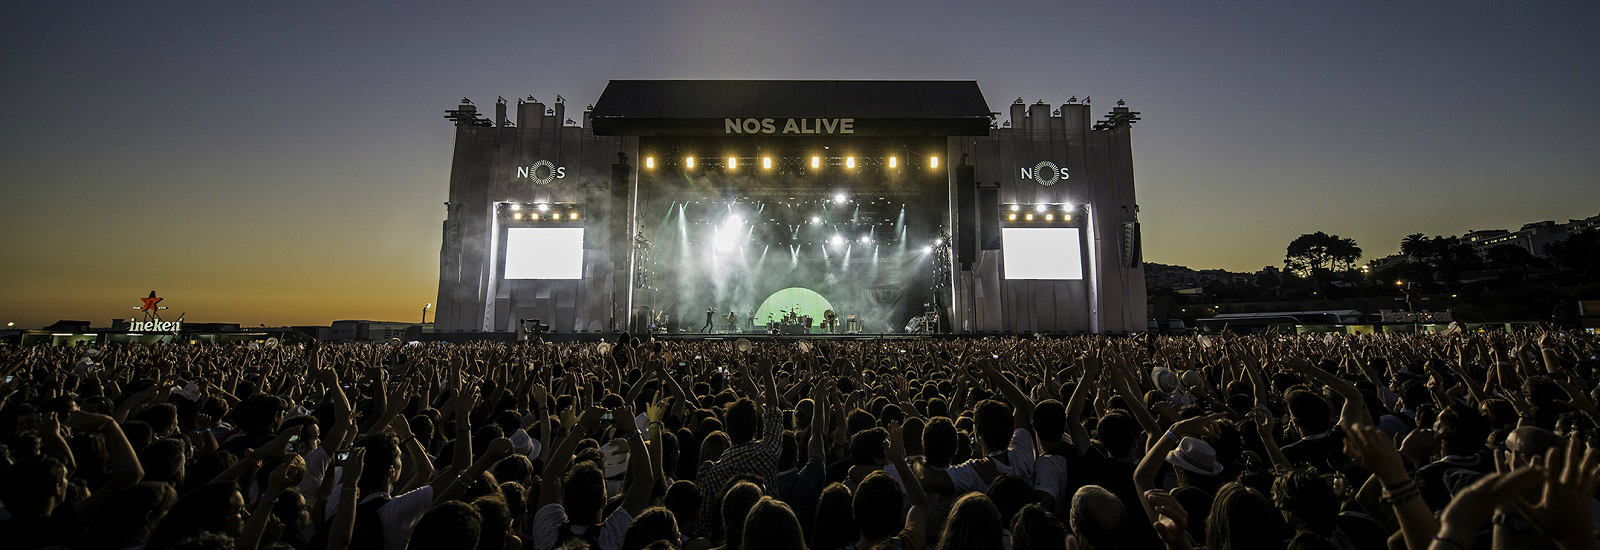 Events in Lissabon